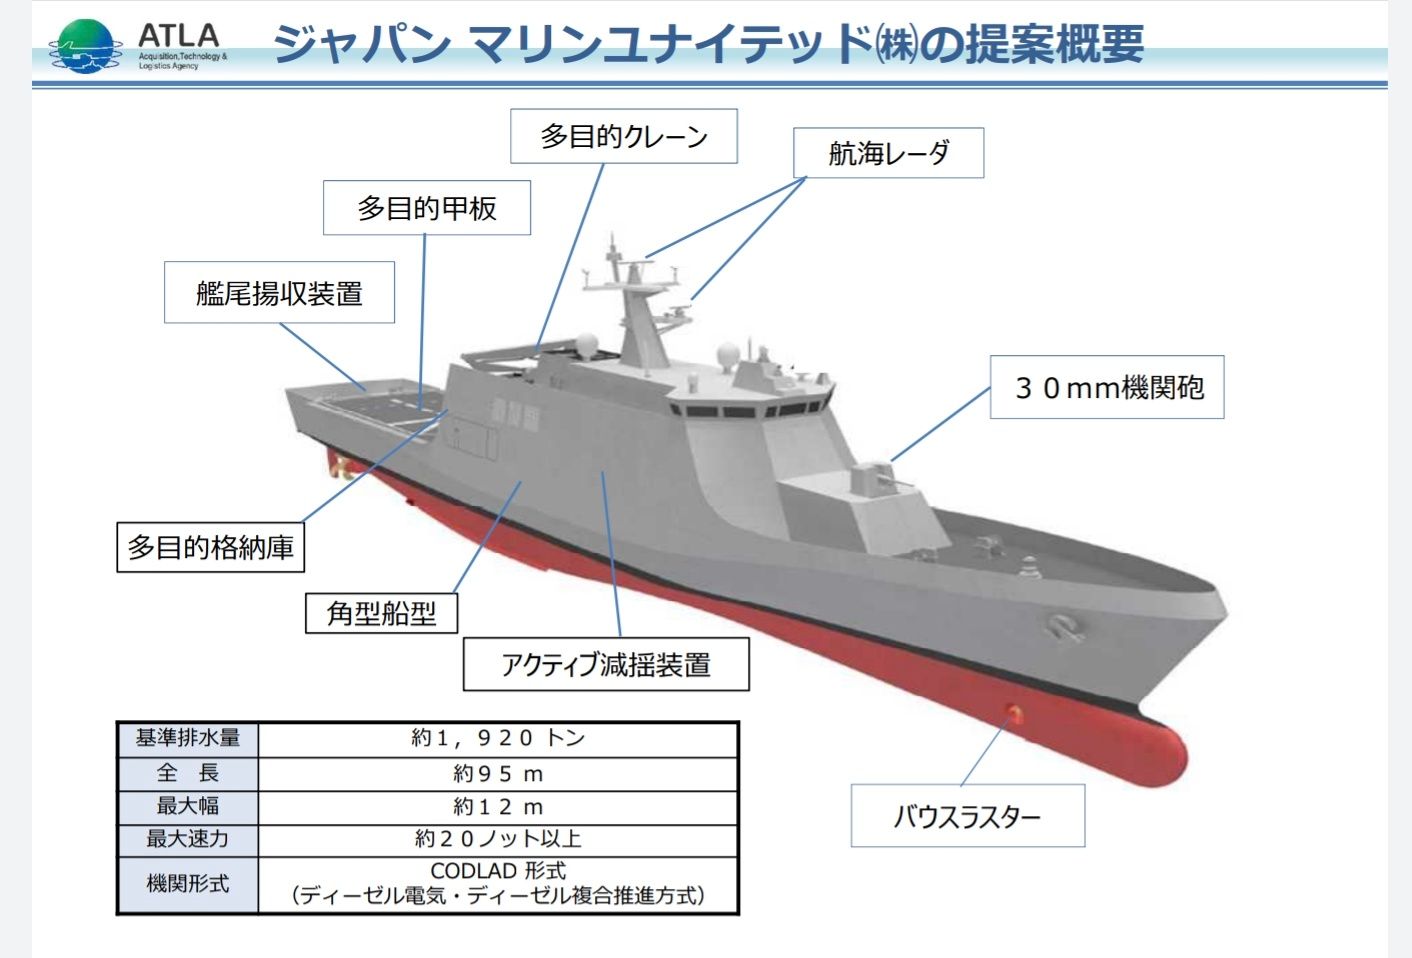 Japan Signs Contract For 12 New Naval OPVs